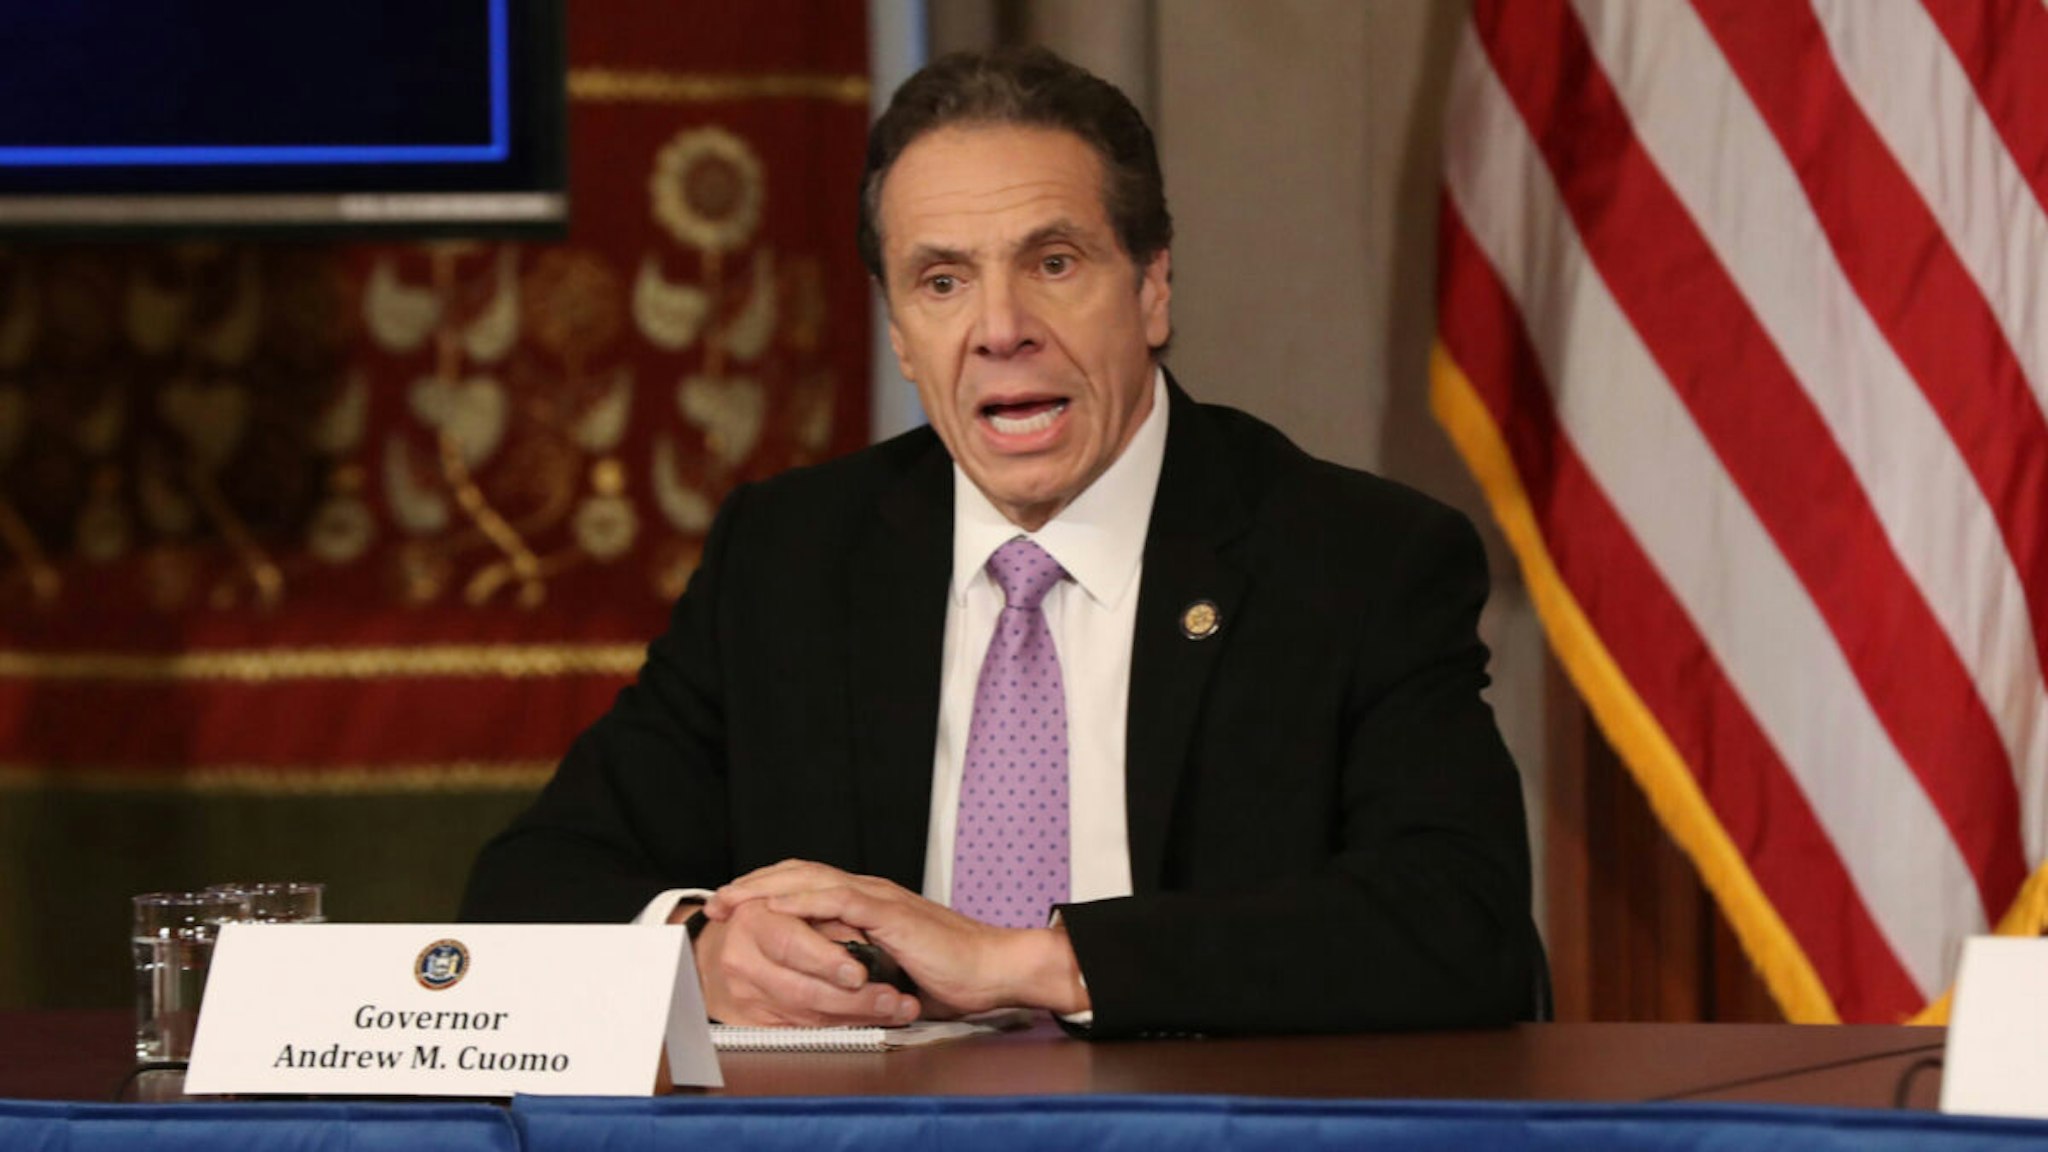 New York Governor Andrew Cuomo speaks during his daily news conference amid the coronavirus outbreak on March 20, 2020 in New York City.